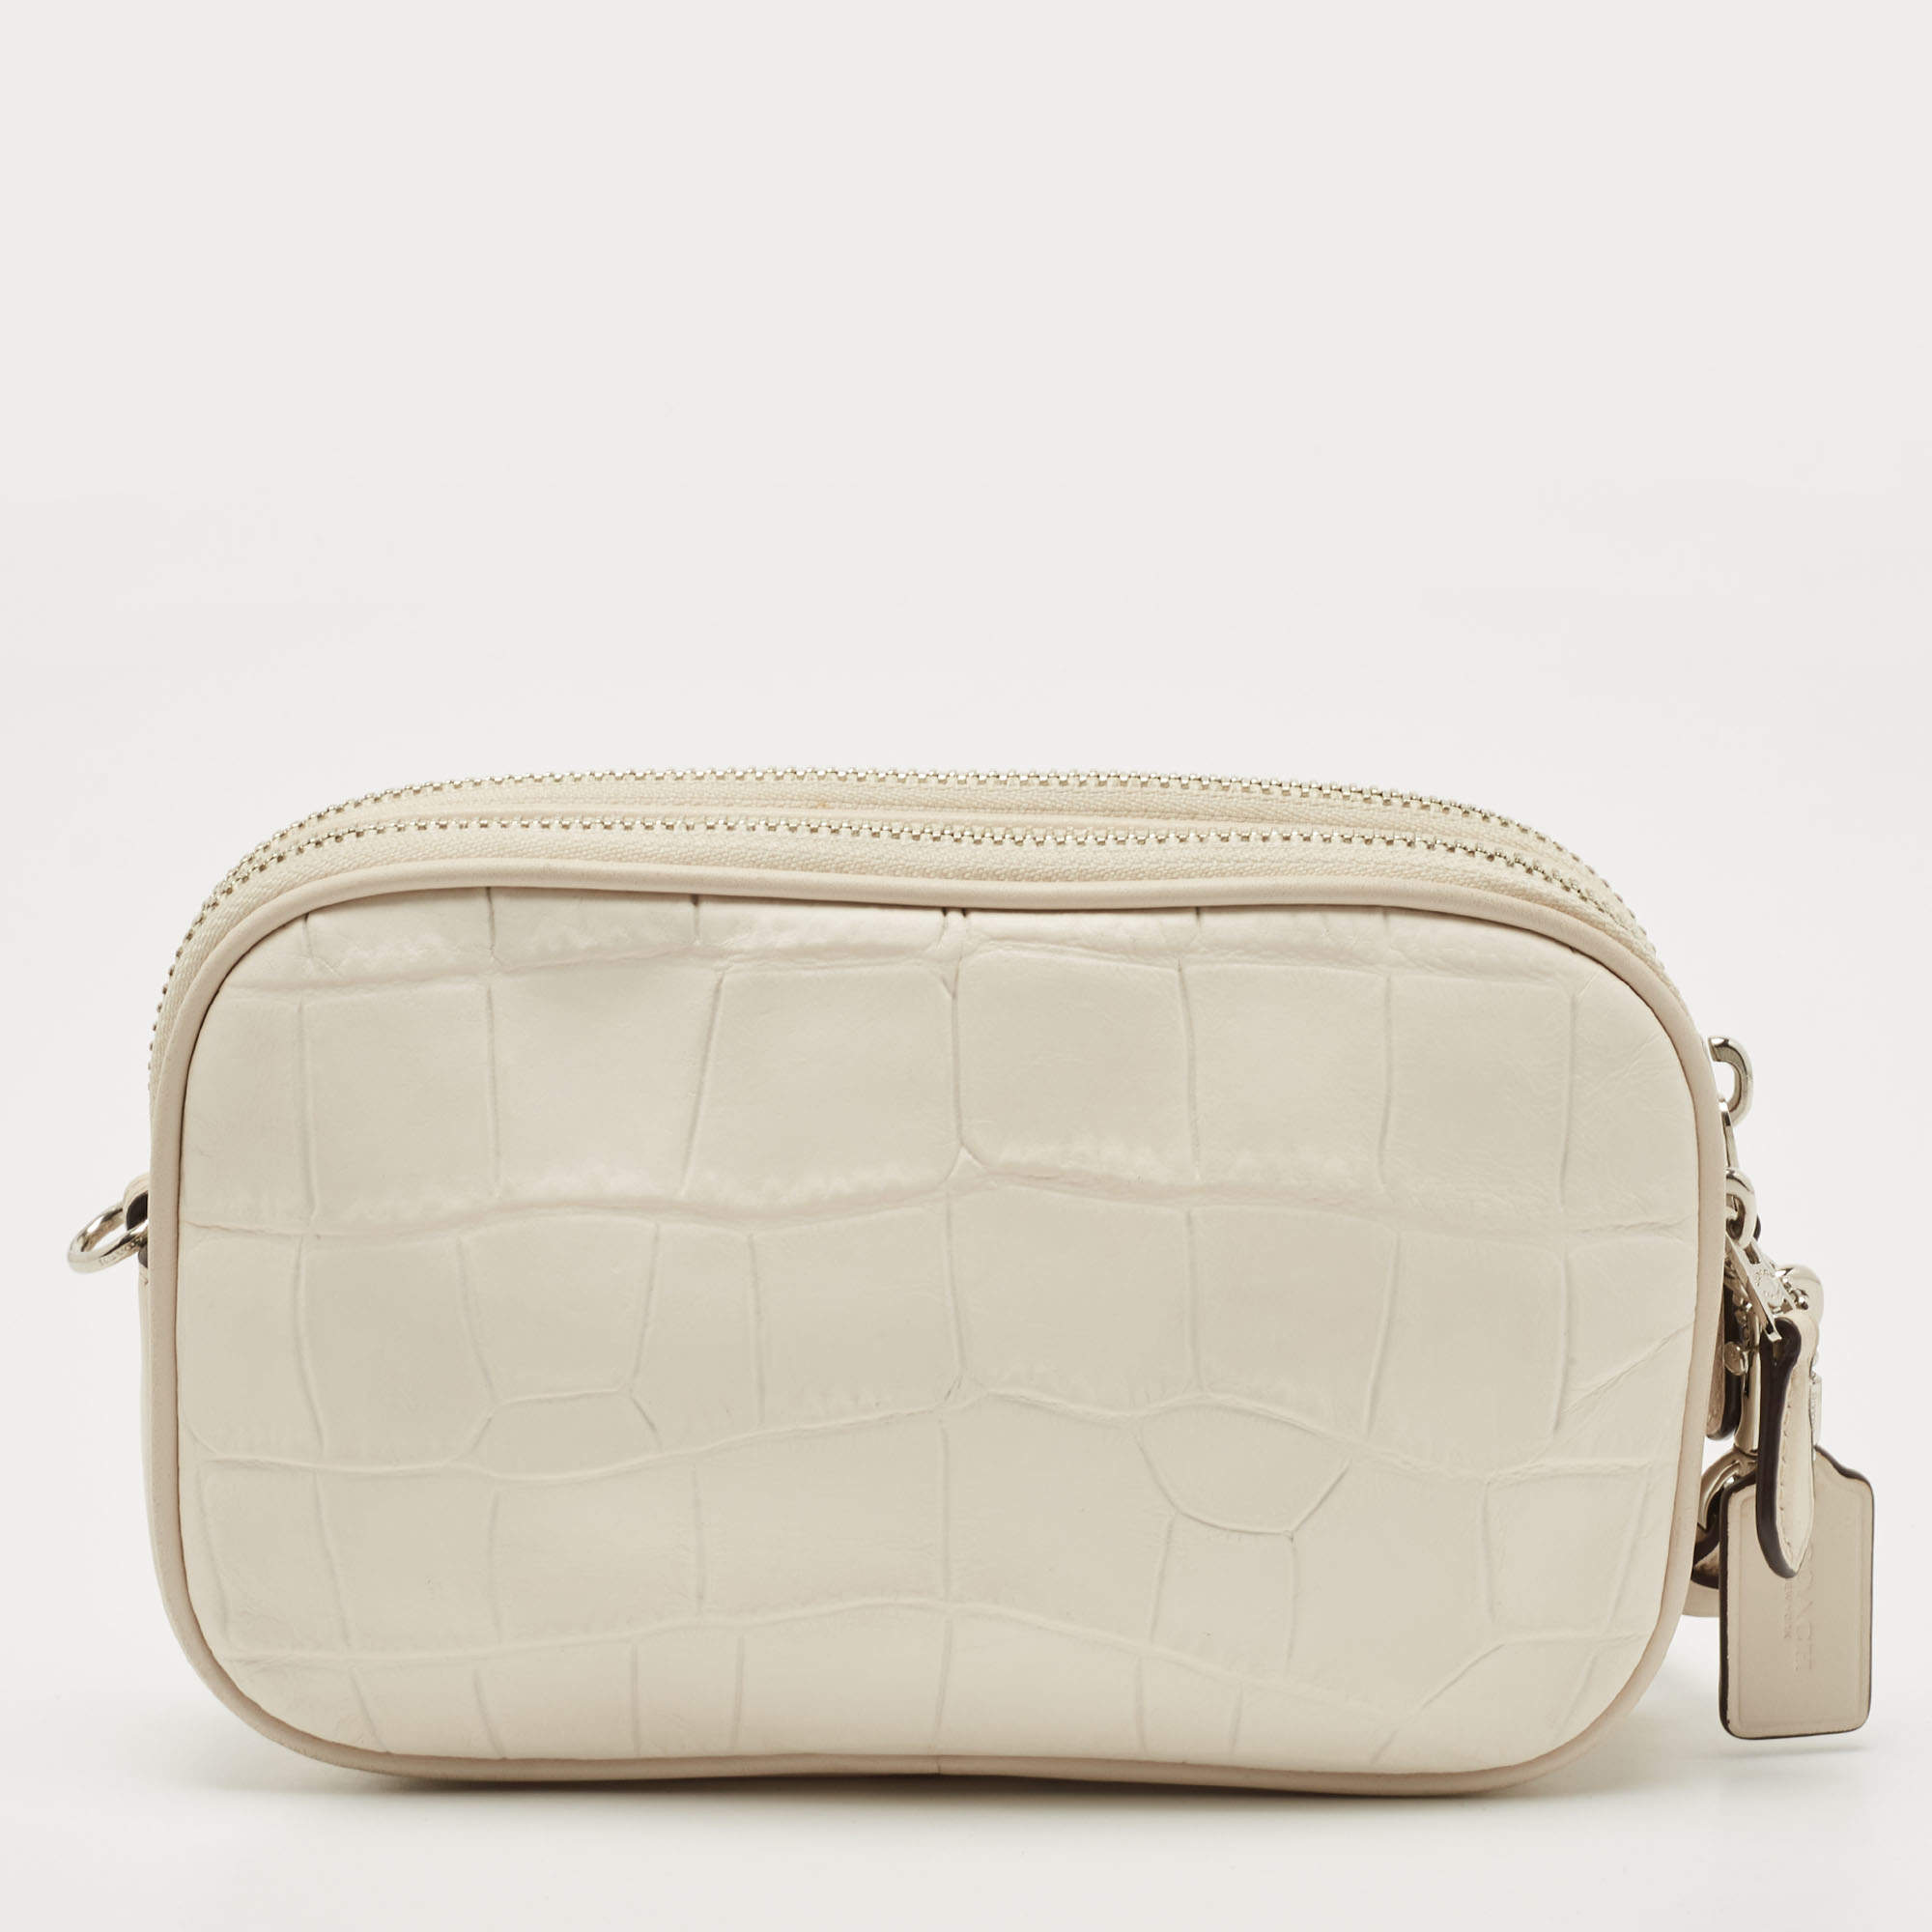 Coach White Croc Embossed Leather Double Zip Camera Crossbody Bag